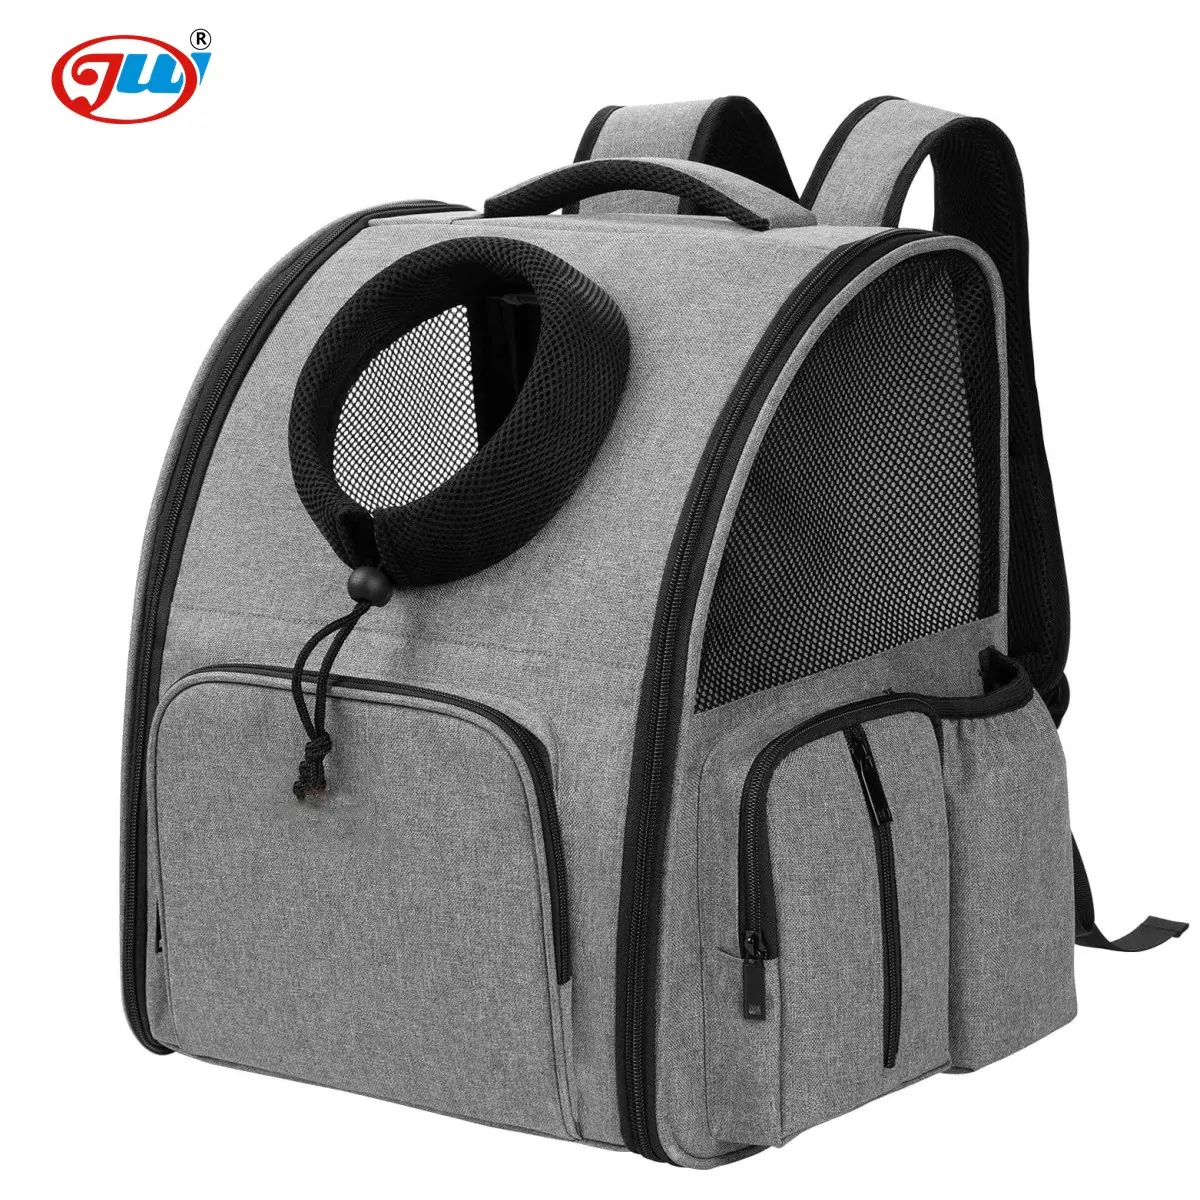 Pet Carrier Backpack for Dogs - Airline Approved Backpack Bag for Travel, Hiking, Camping, Walking & Outdoor Use, Design